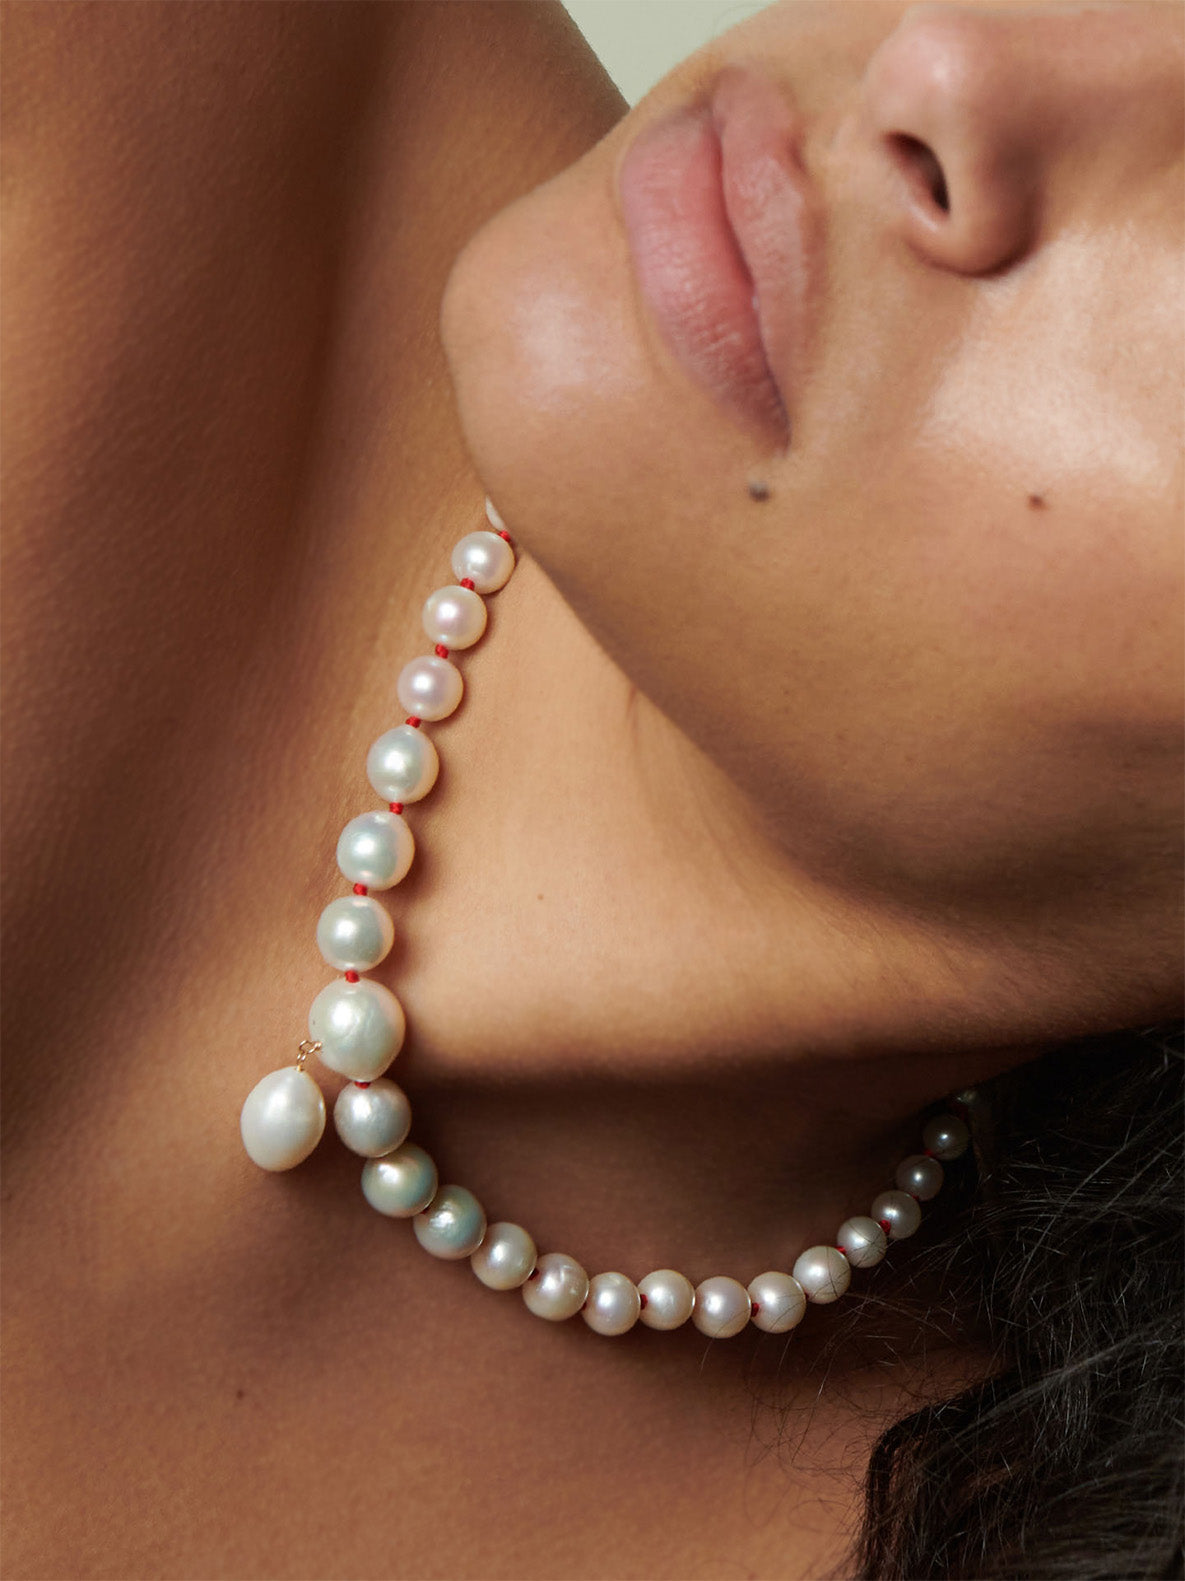 Boujee 14kt Yellow Gold Pearl Necklace pictured on model. Red thread.